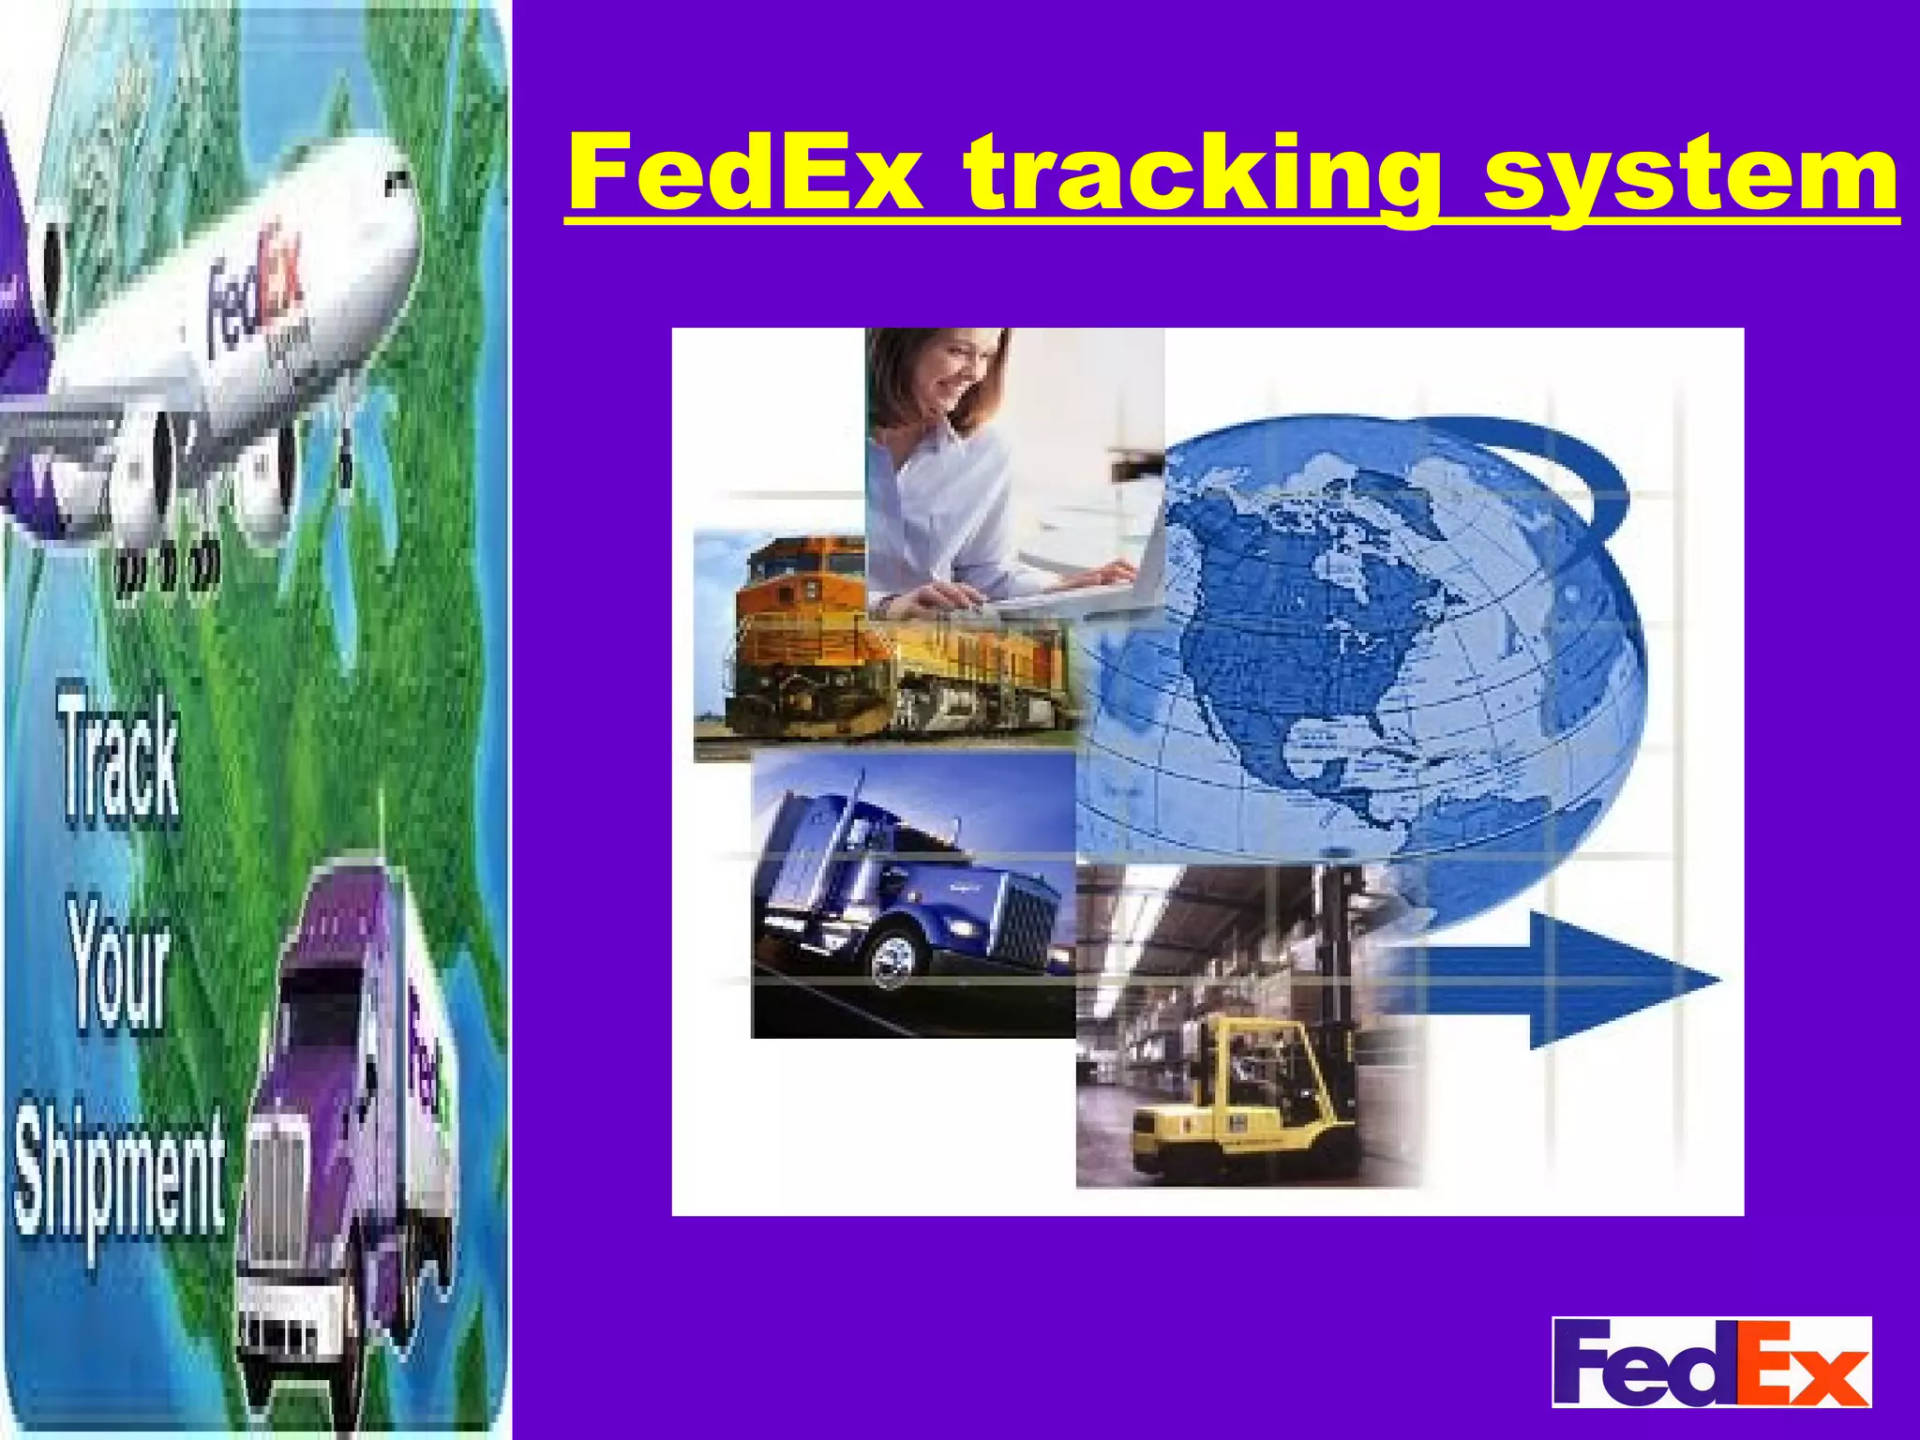 FedEx Tracking System Poster Wallpaper